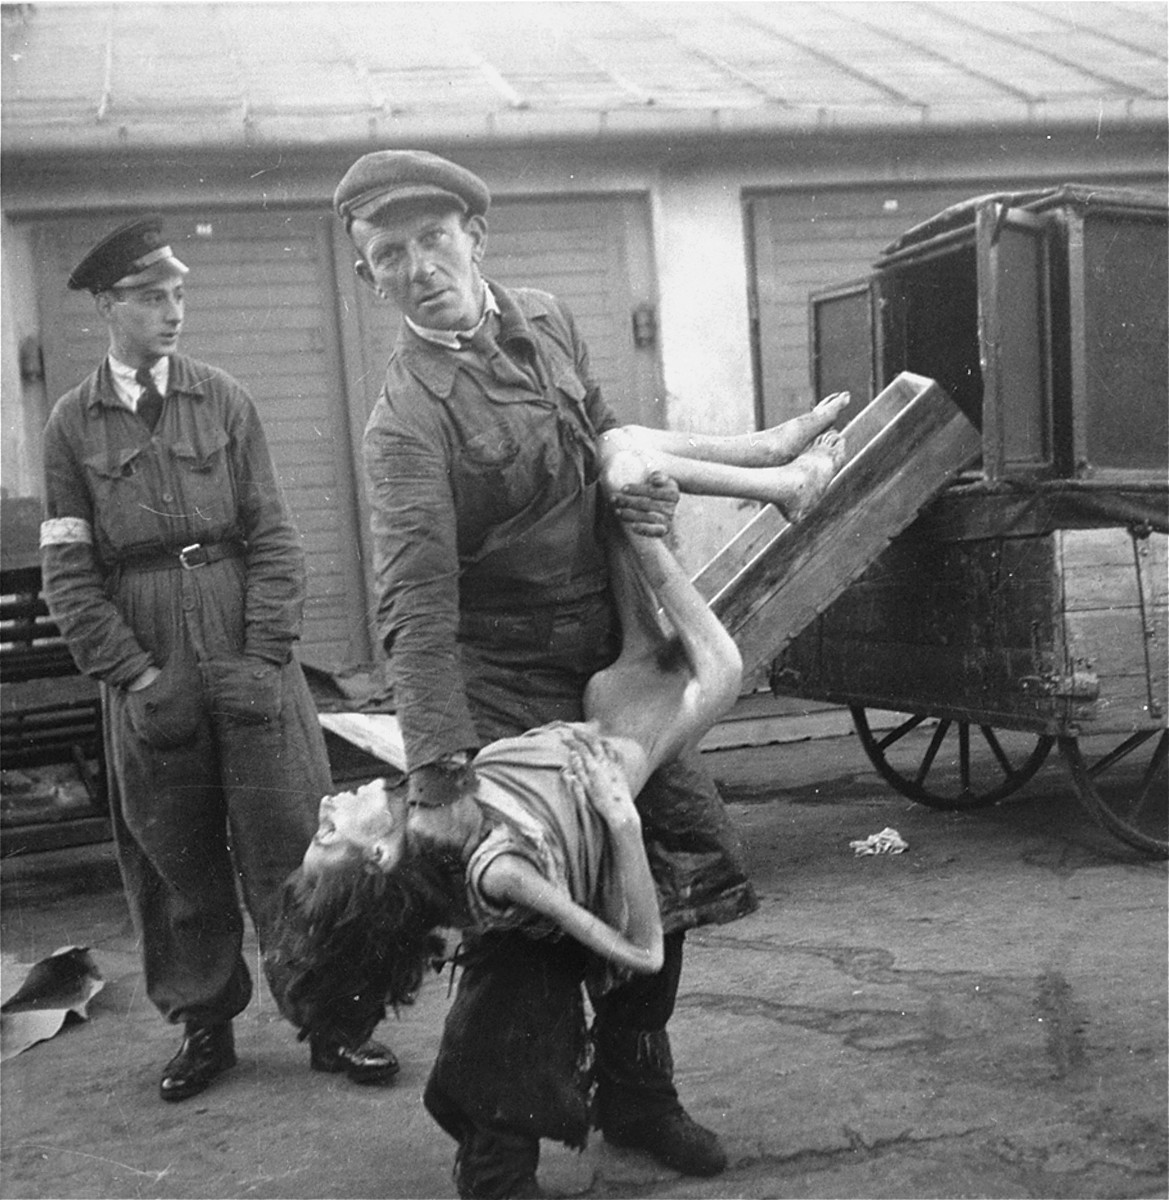 An undertaker in the Warsaw ghetto's Jewish cemetery on Okopowa Street lifts the body of a woman for Heinrich Joest to show him how little it weighs.  

Joest's caption reads: "The dead were not heavy, as one corpse-bearer showed me - although I had not asked him to - in front of the buildings of the Jewish cemetery."